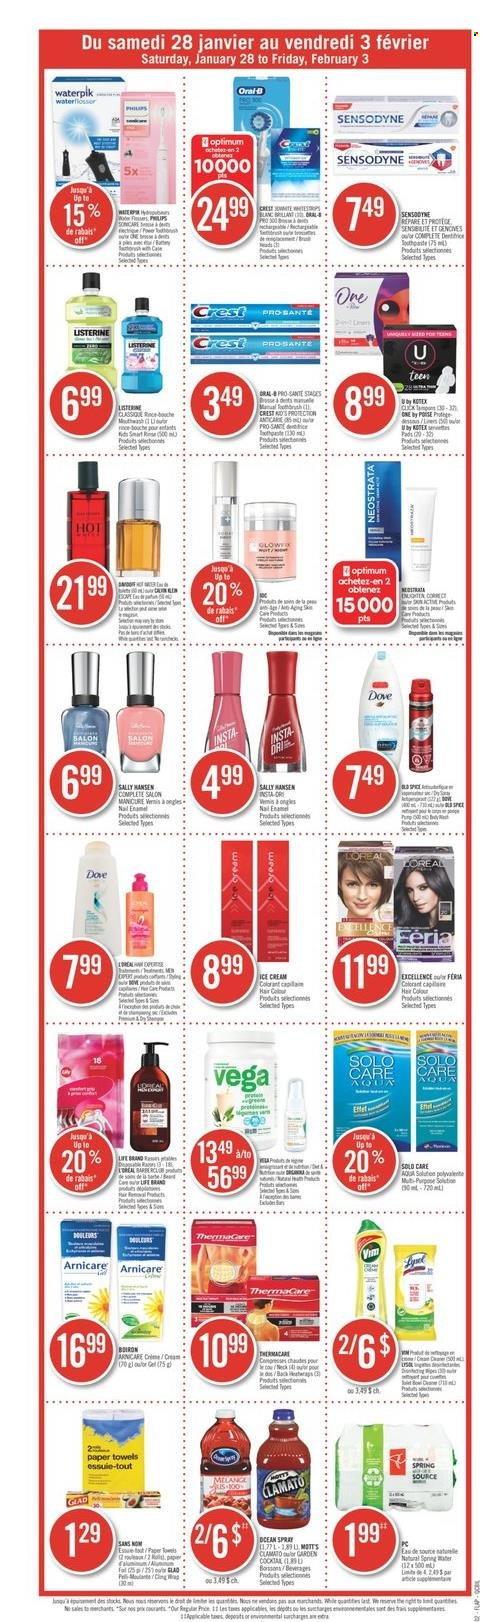 thumbnail - Pharmaprix Flyer - January 28, 2023 - February 03, 2023 - Sales products - Philips, Mott's, ice cream, Dove, spice, Clamato, spring water, kitchen towels, paper towels, mouthwash, Crest, Kotex, Kotex pads, L’Oréal, hair color, manicure, nail enamel, Optimum, Sonicare, Thermacare, Boiron, Listerine, Sally Hansen, Old Spice, Oral-B, Sensodyne. Page 15.